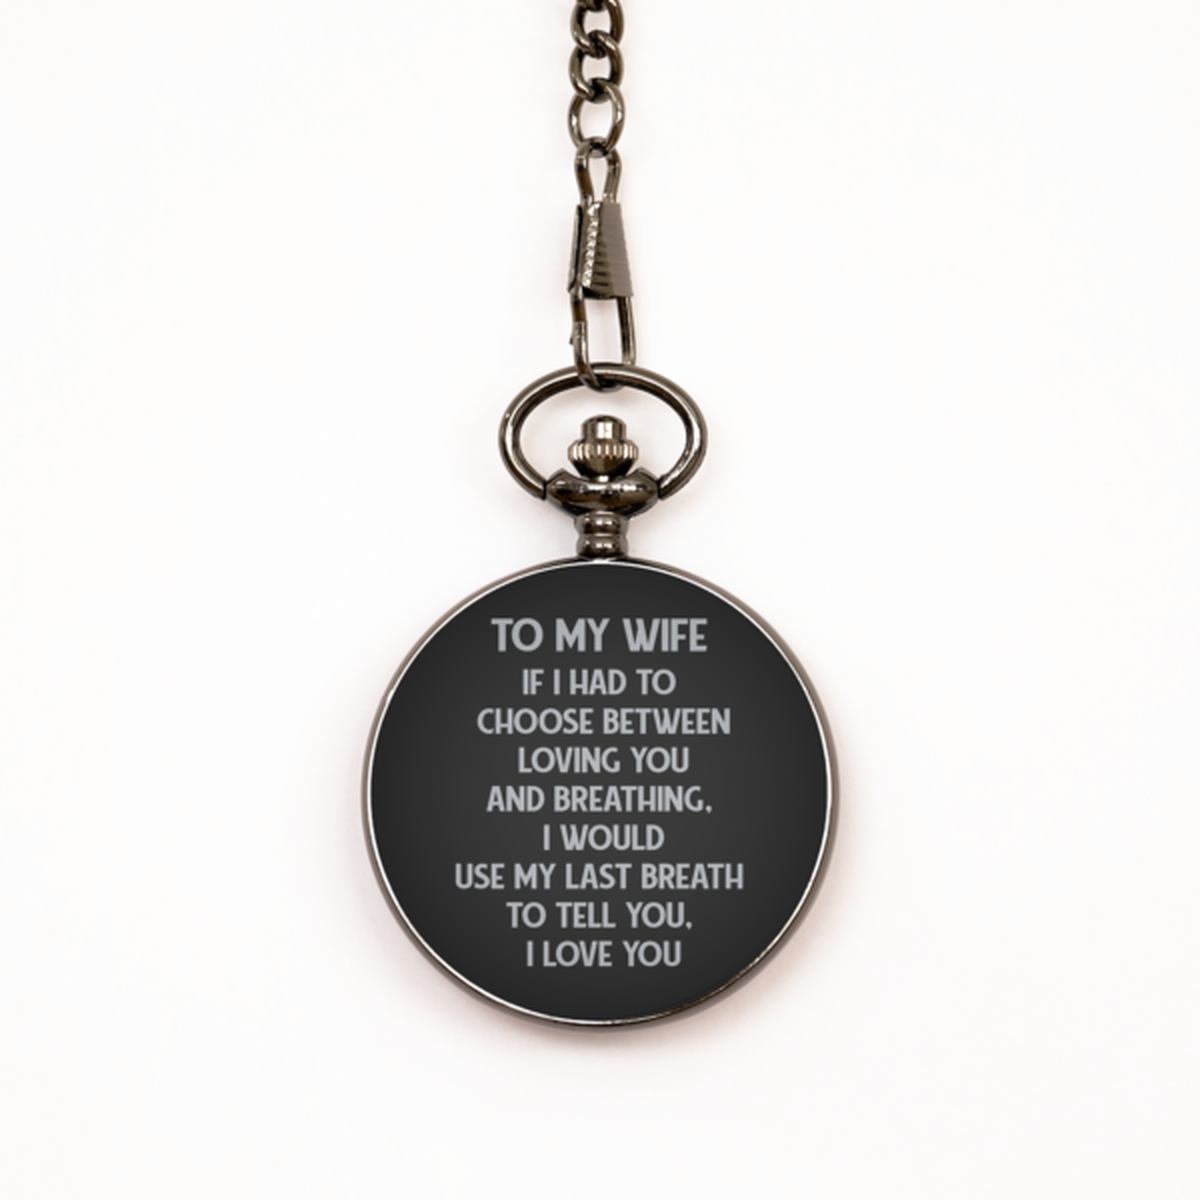 To My Wife Black Pocket Watch, Loving You, Birthday Gifts For Wife From Husband, Valentines Gifts For Women